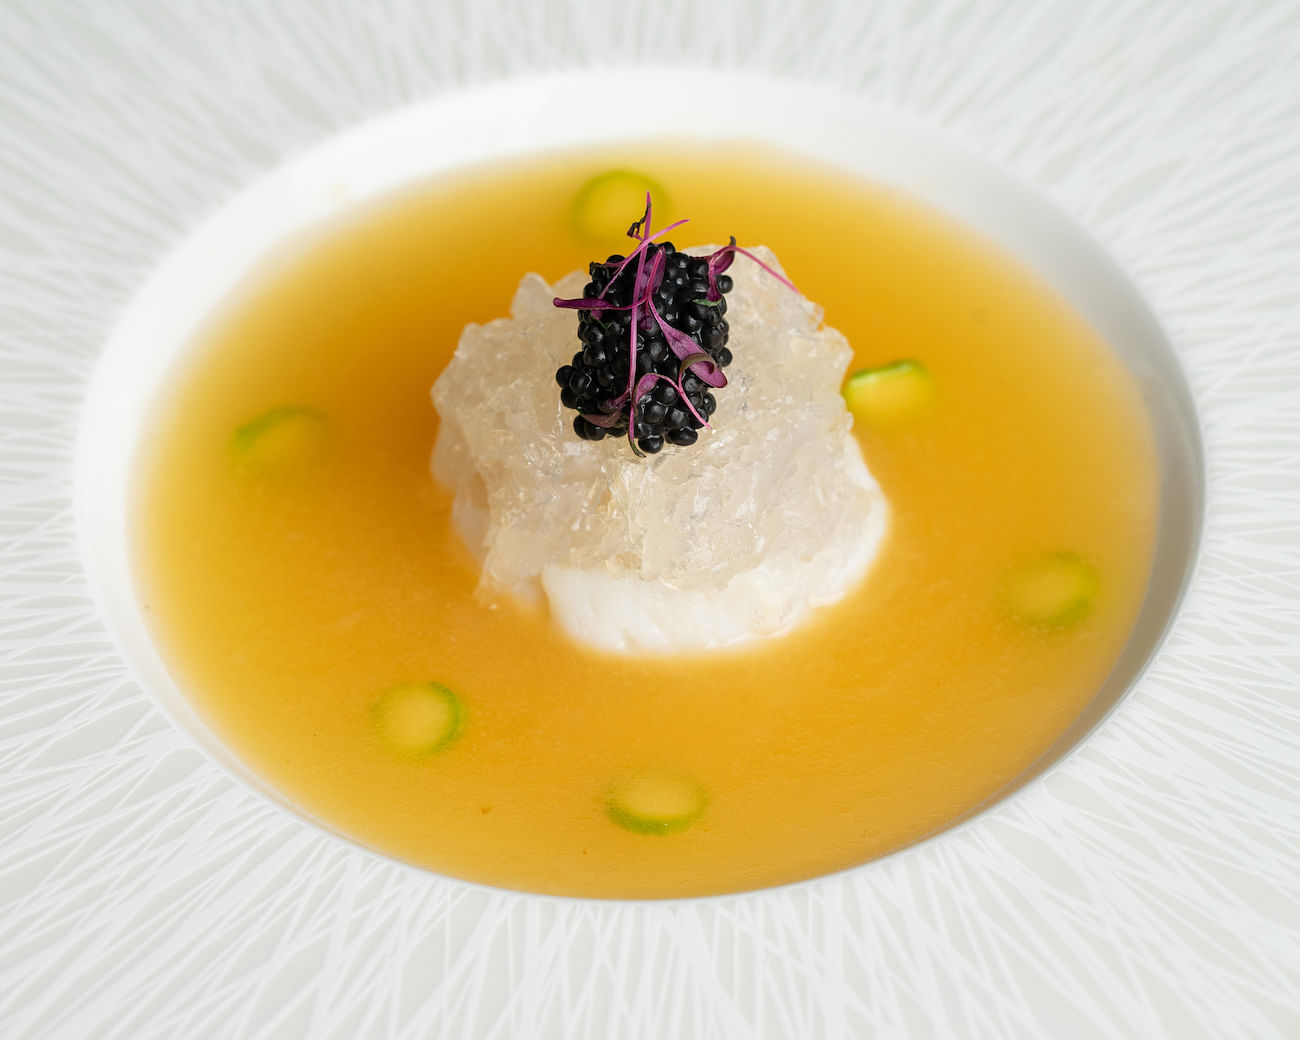 Braised Scallop Dumpling filled with Bird's Nest and Bamboo Fungus in Supreme Broth